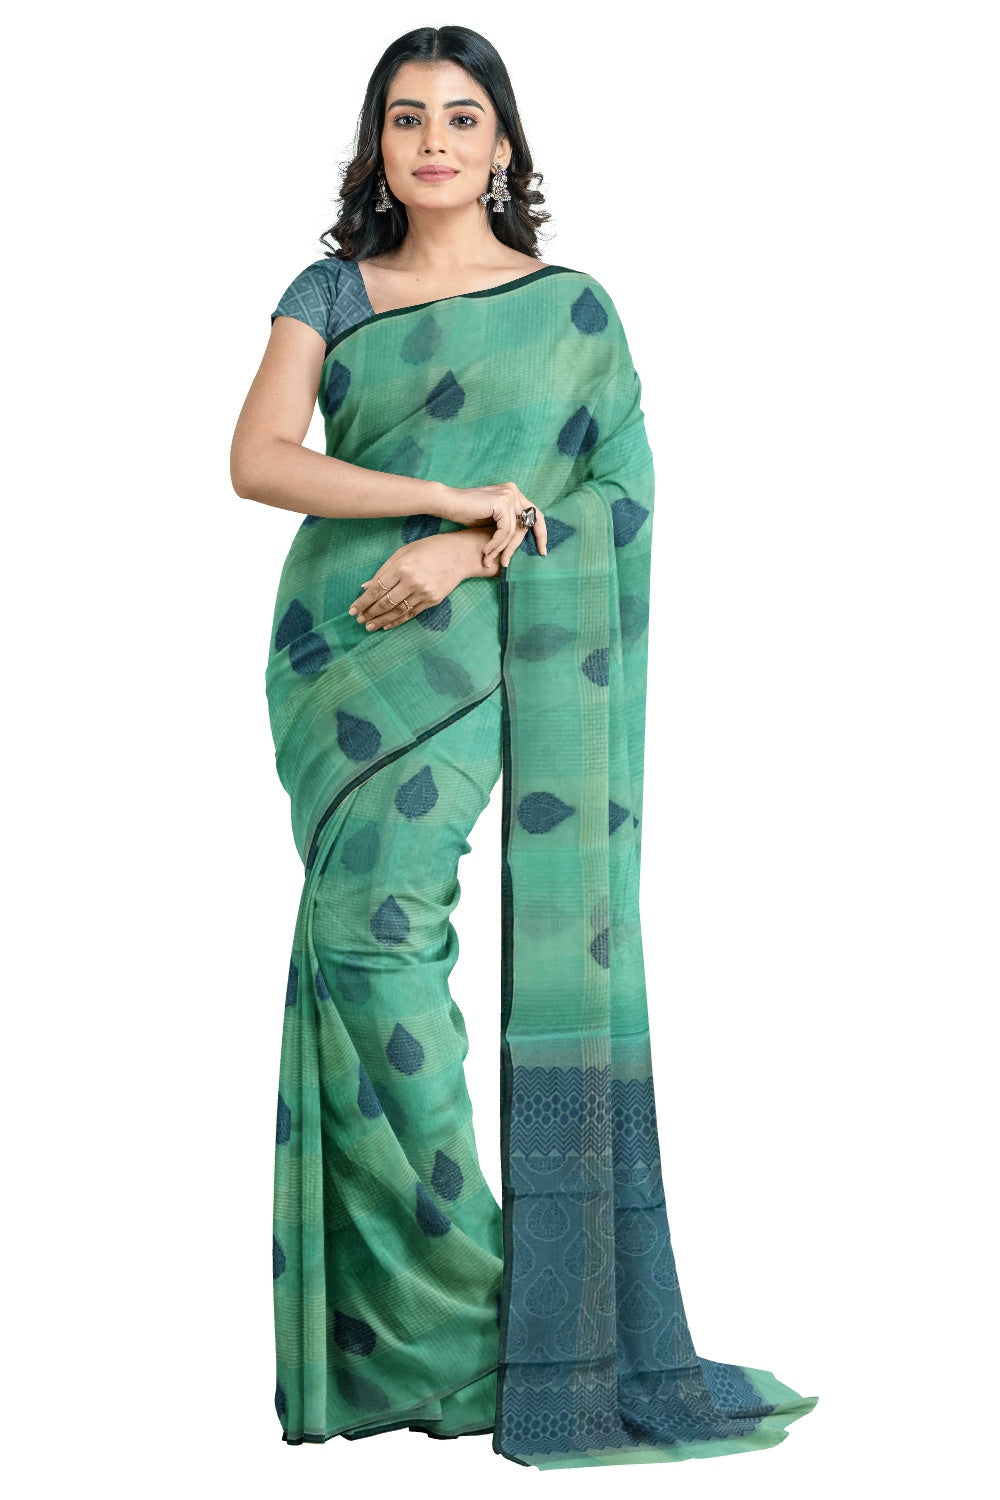 Southloom Sico Gadwal Semi Silk Saree in Turquoise Blue with Floral Motifs (Blouse Piece with Work)